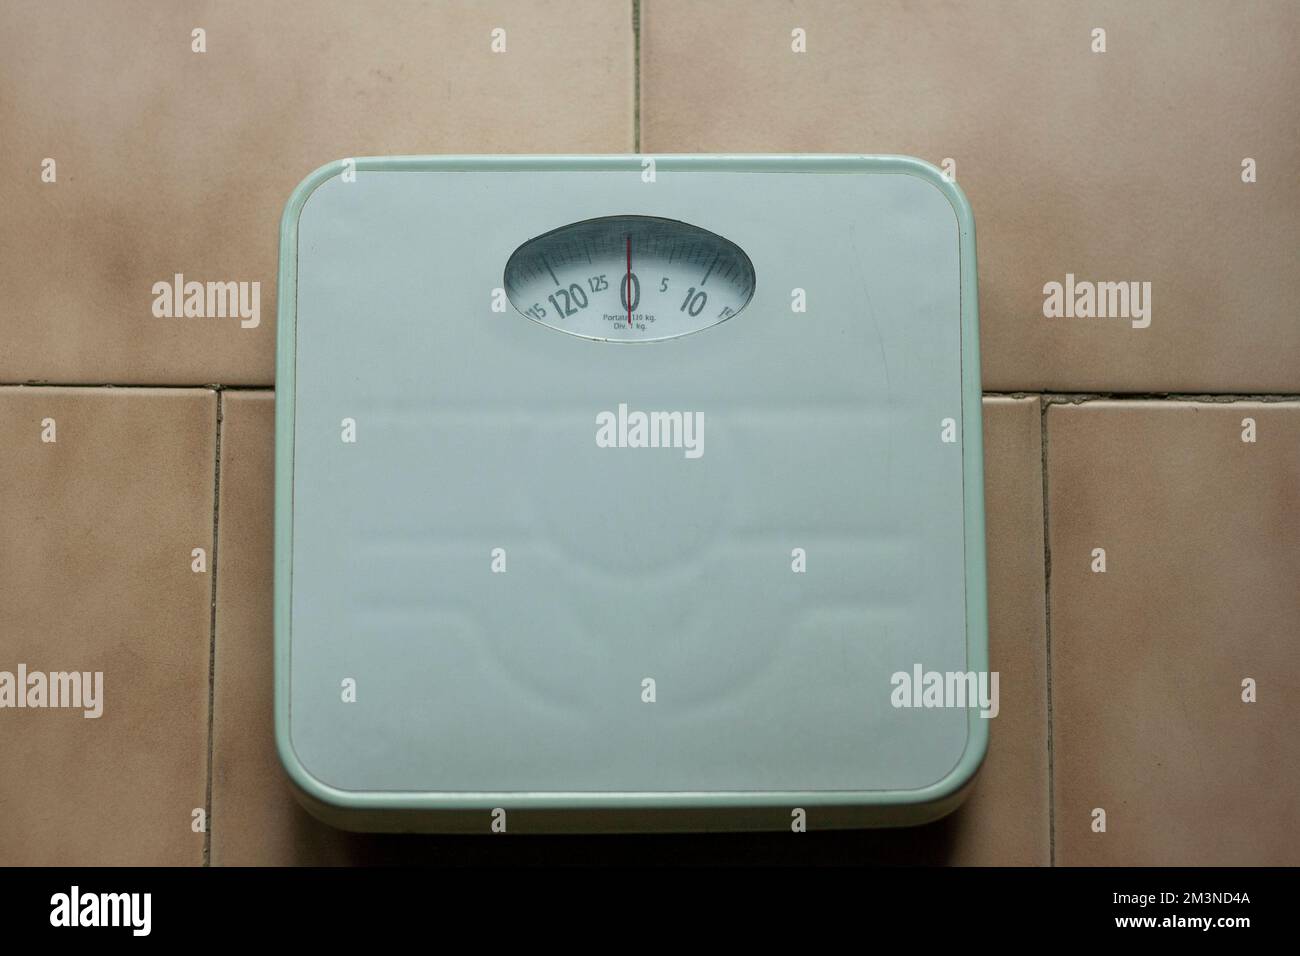 https://c8.alamy.com/comp/2M3ND4A/analog-scale-where-a-person-is-weighed-and-its-weight-can-be-seen-in-kg-2M3ND4A.jpg